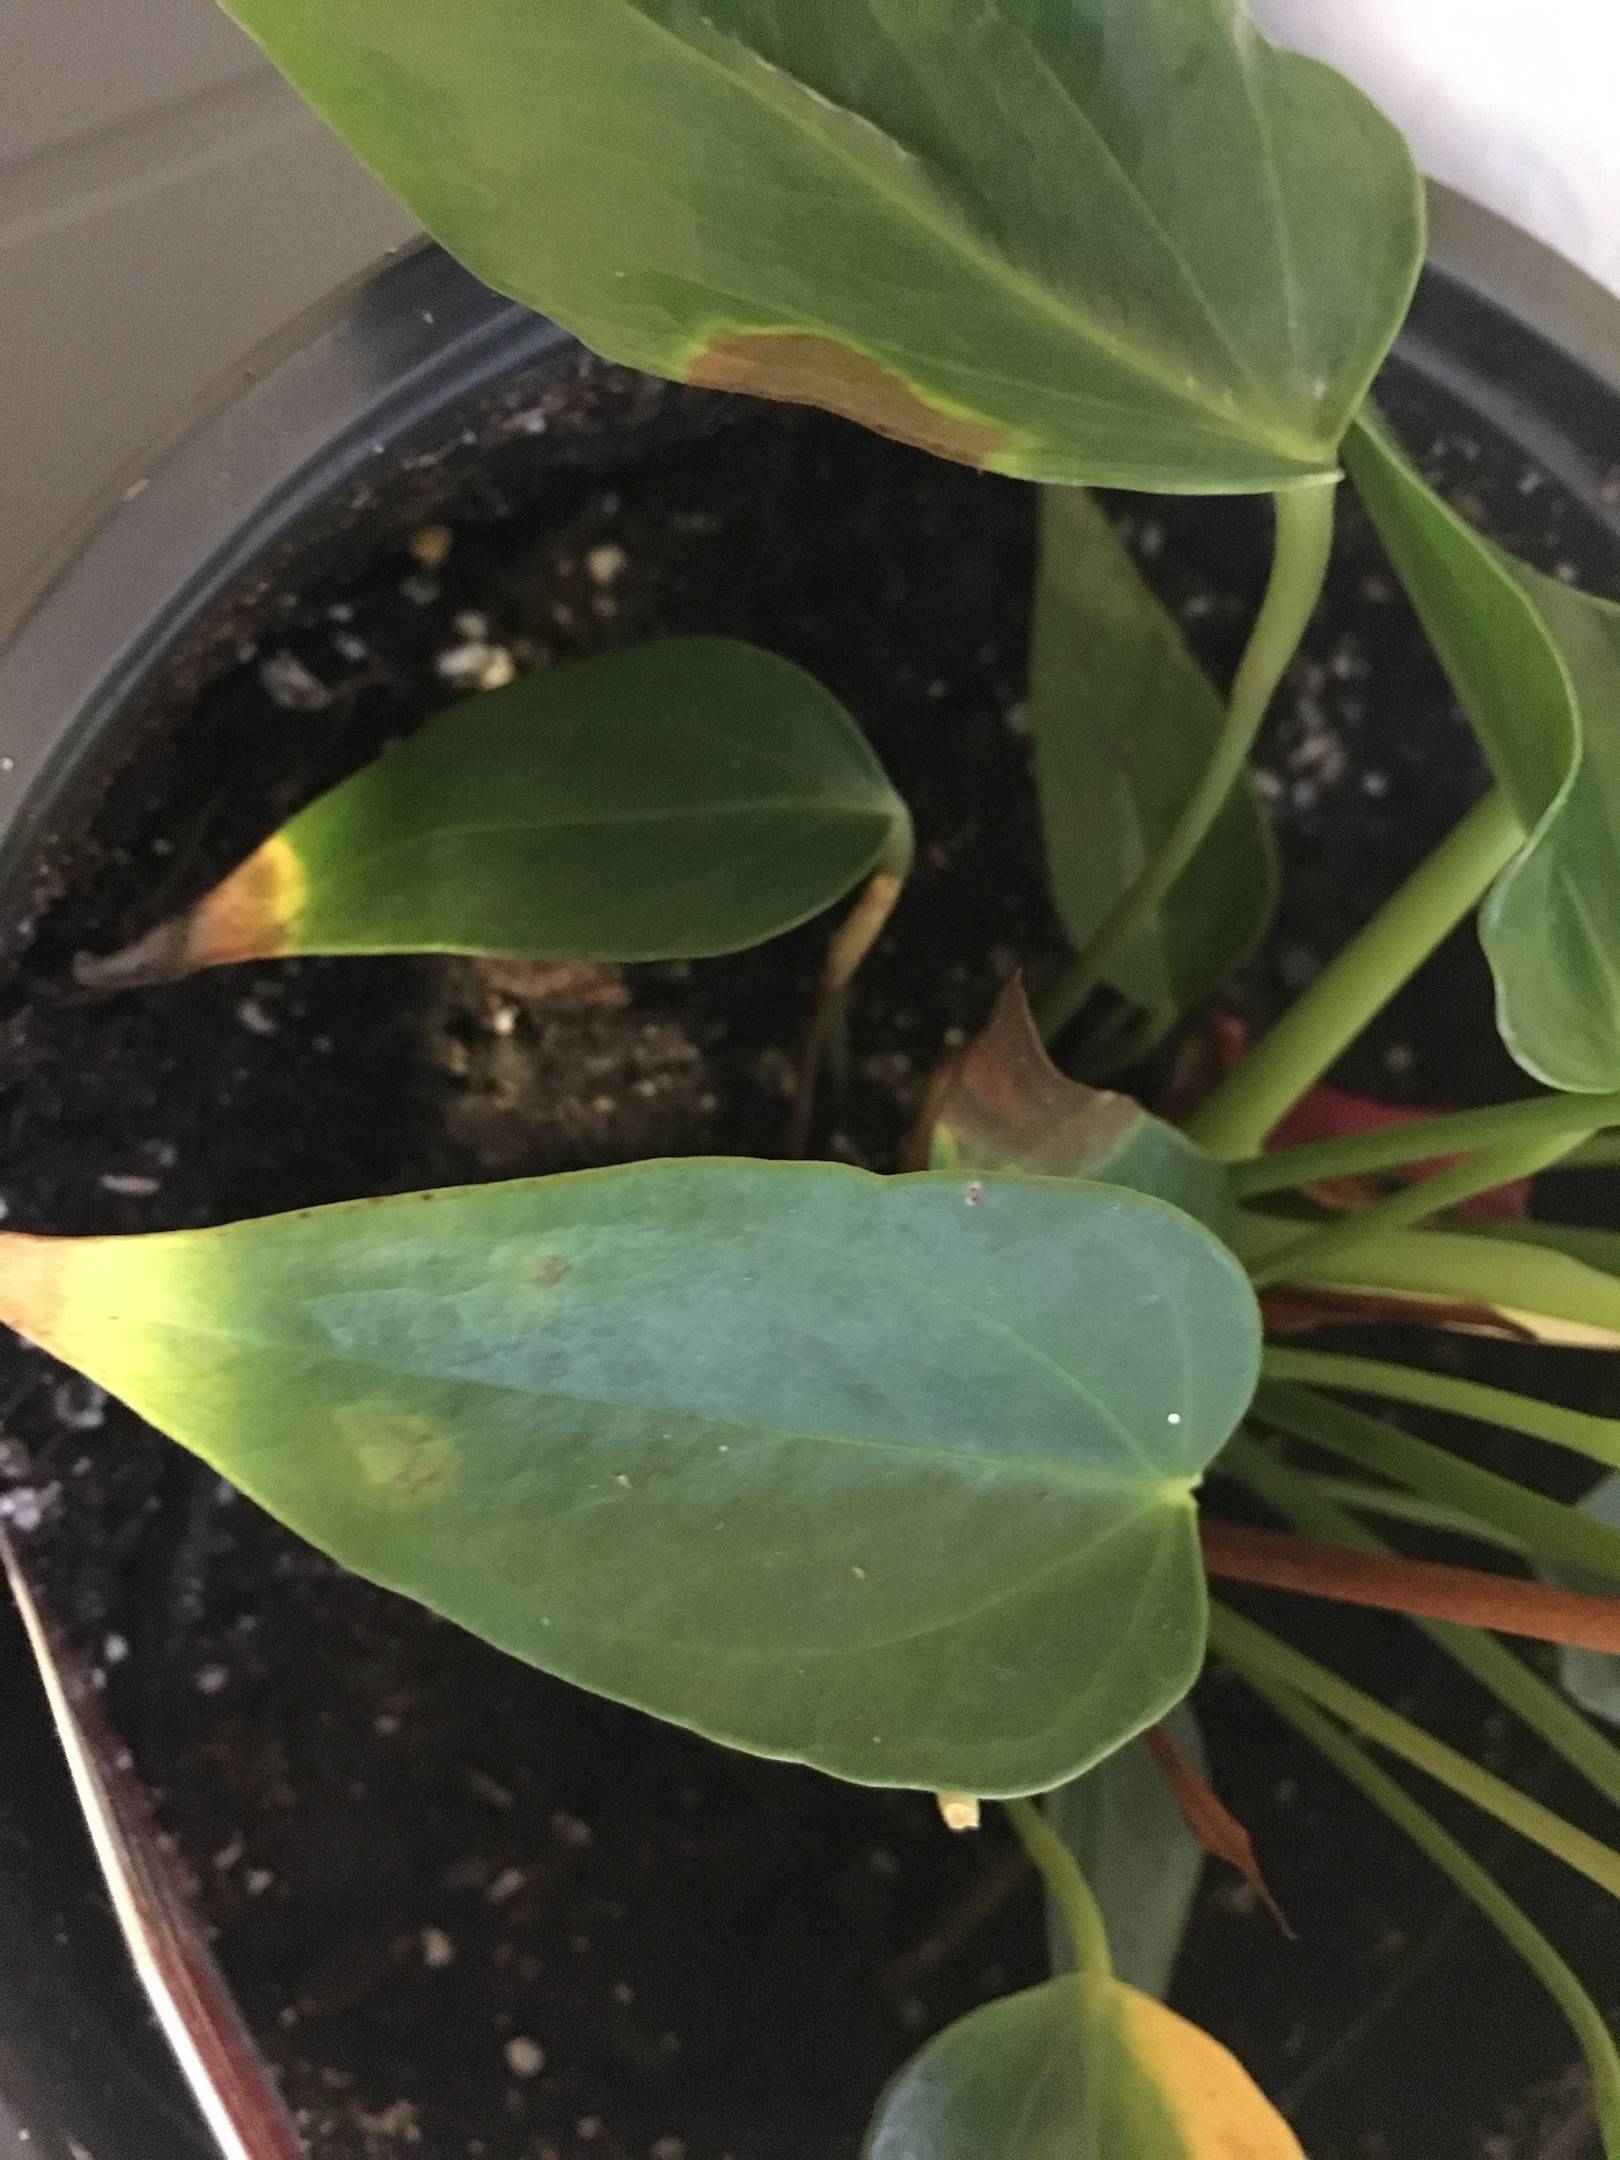 houseplants - My anthurium's leaves are turning yellow and brown ...